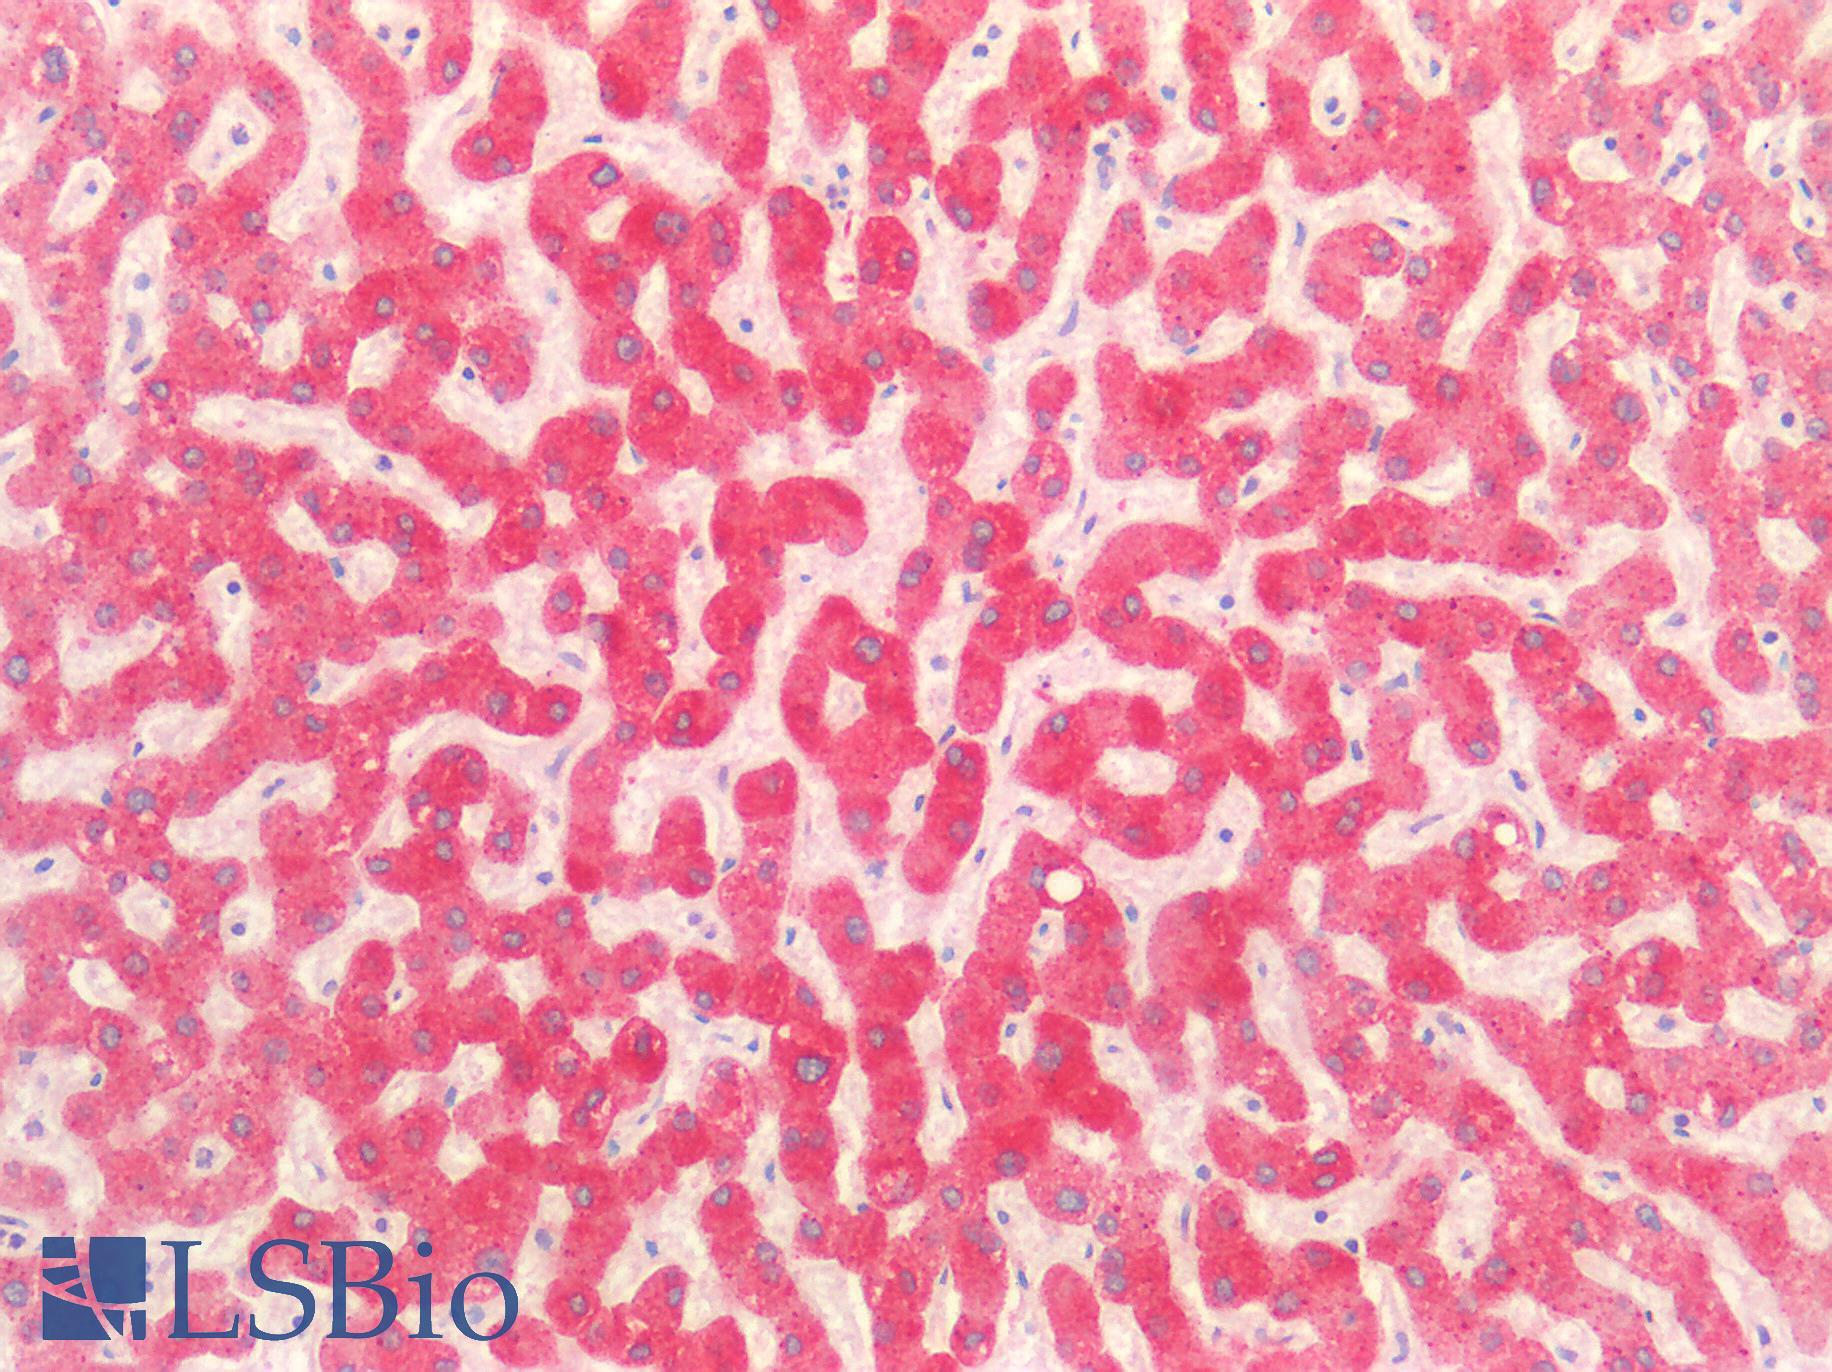 SMAD3 Antibody - Human Liver: Formalin-Fixed, Paraffin-Embedded (FFPE)